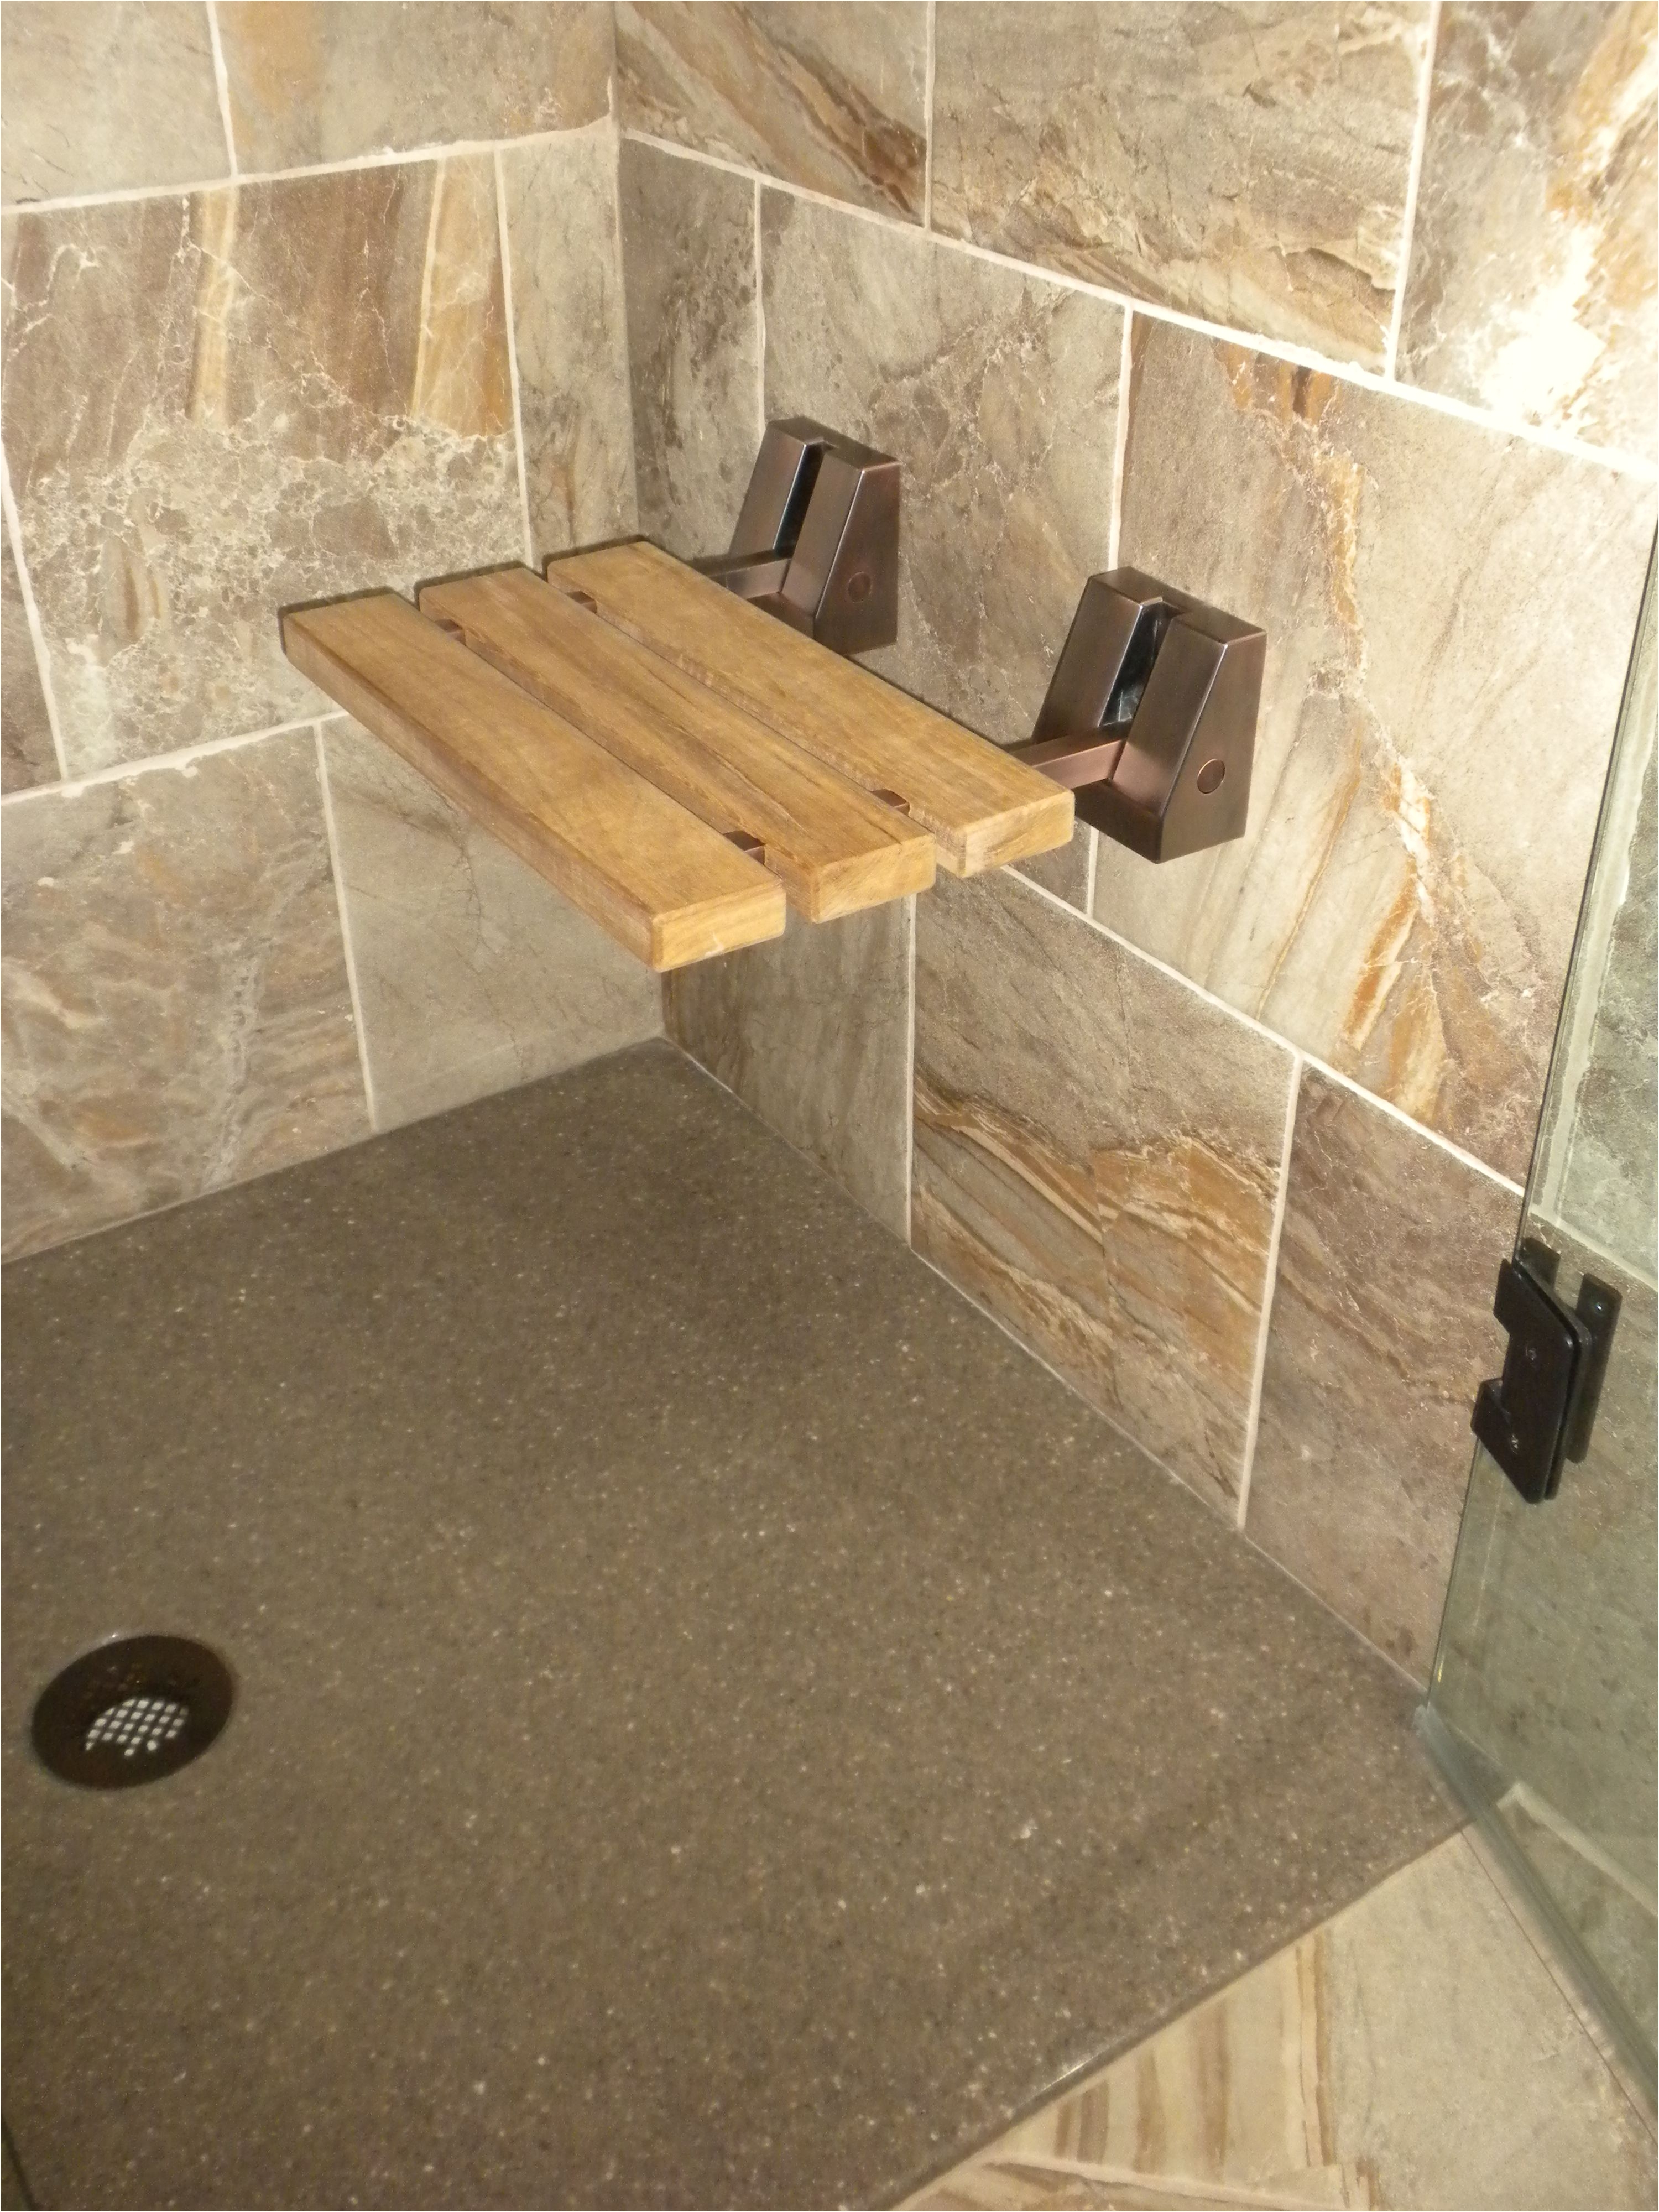 fold away shower seats offer flexibility and save space teak shower seat onyx